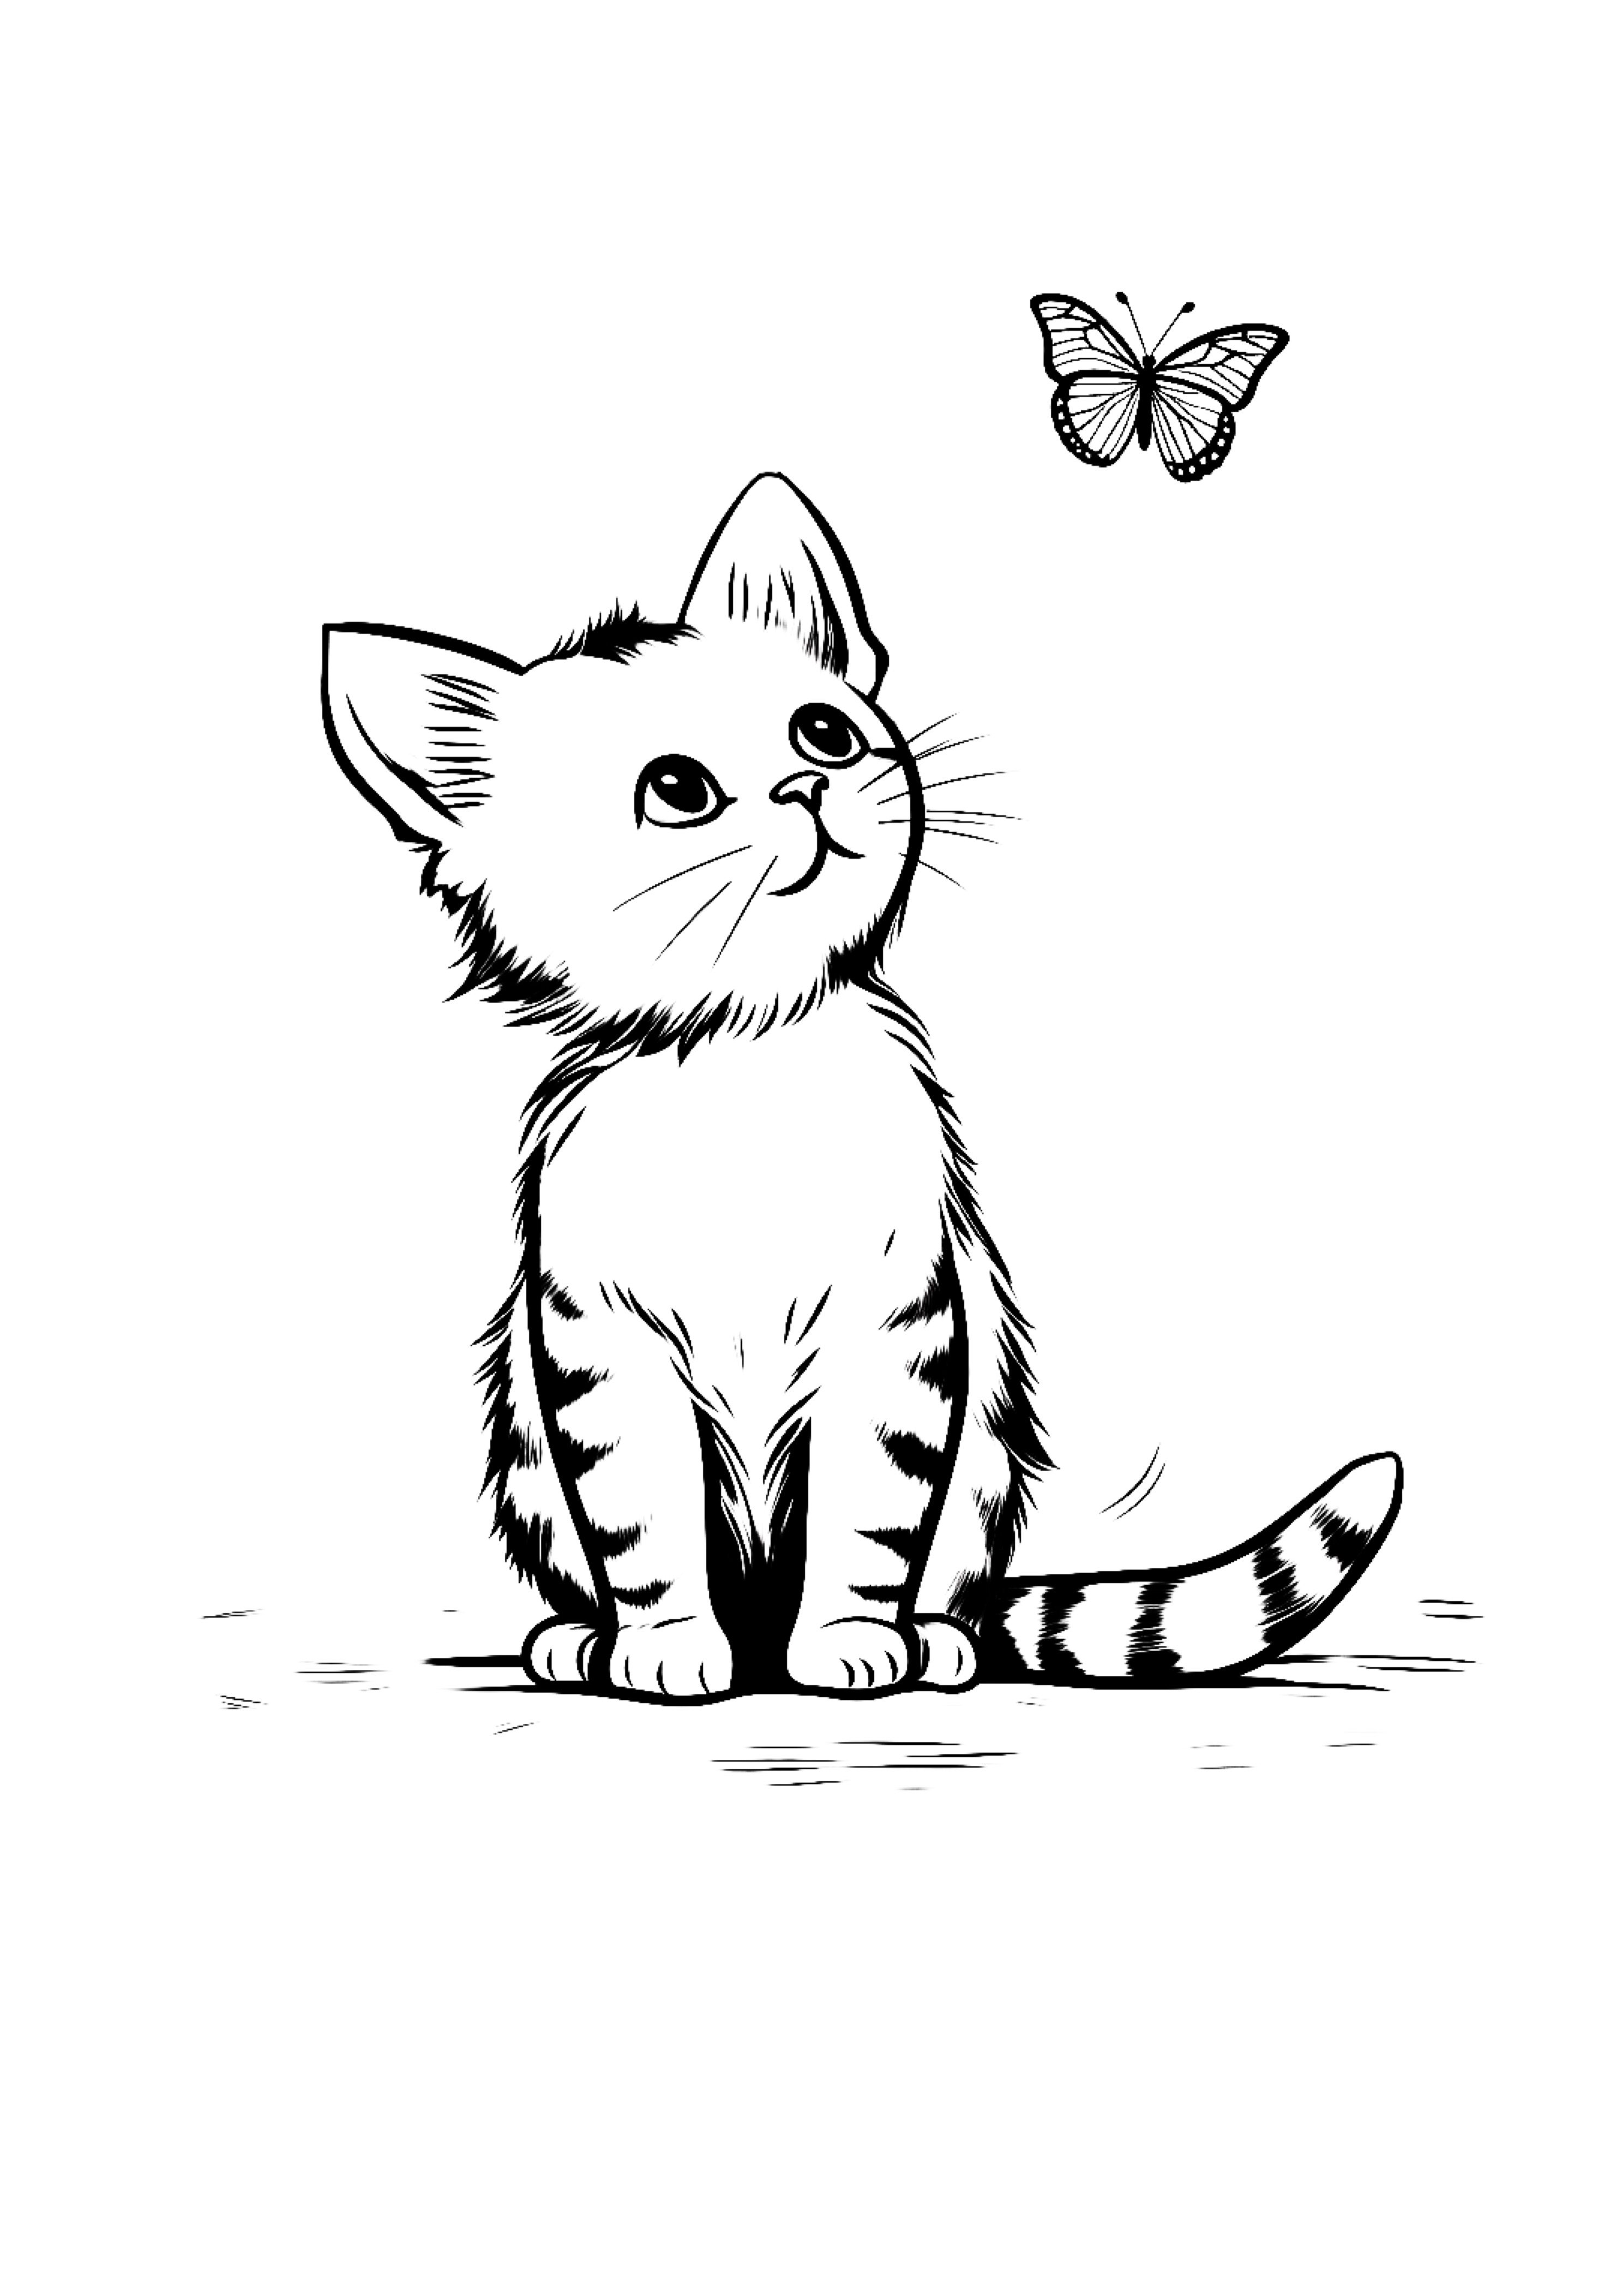 Kitty butterfly Coloring Pages for Kids.jpg